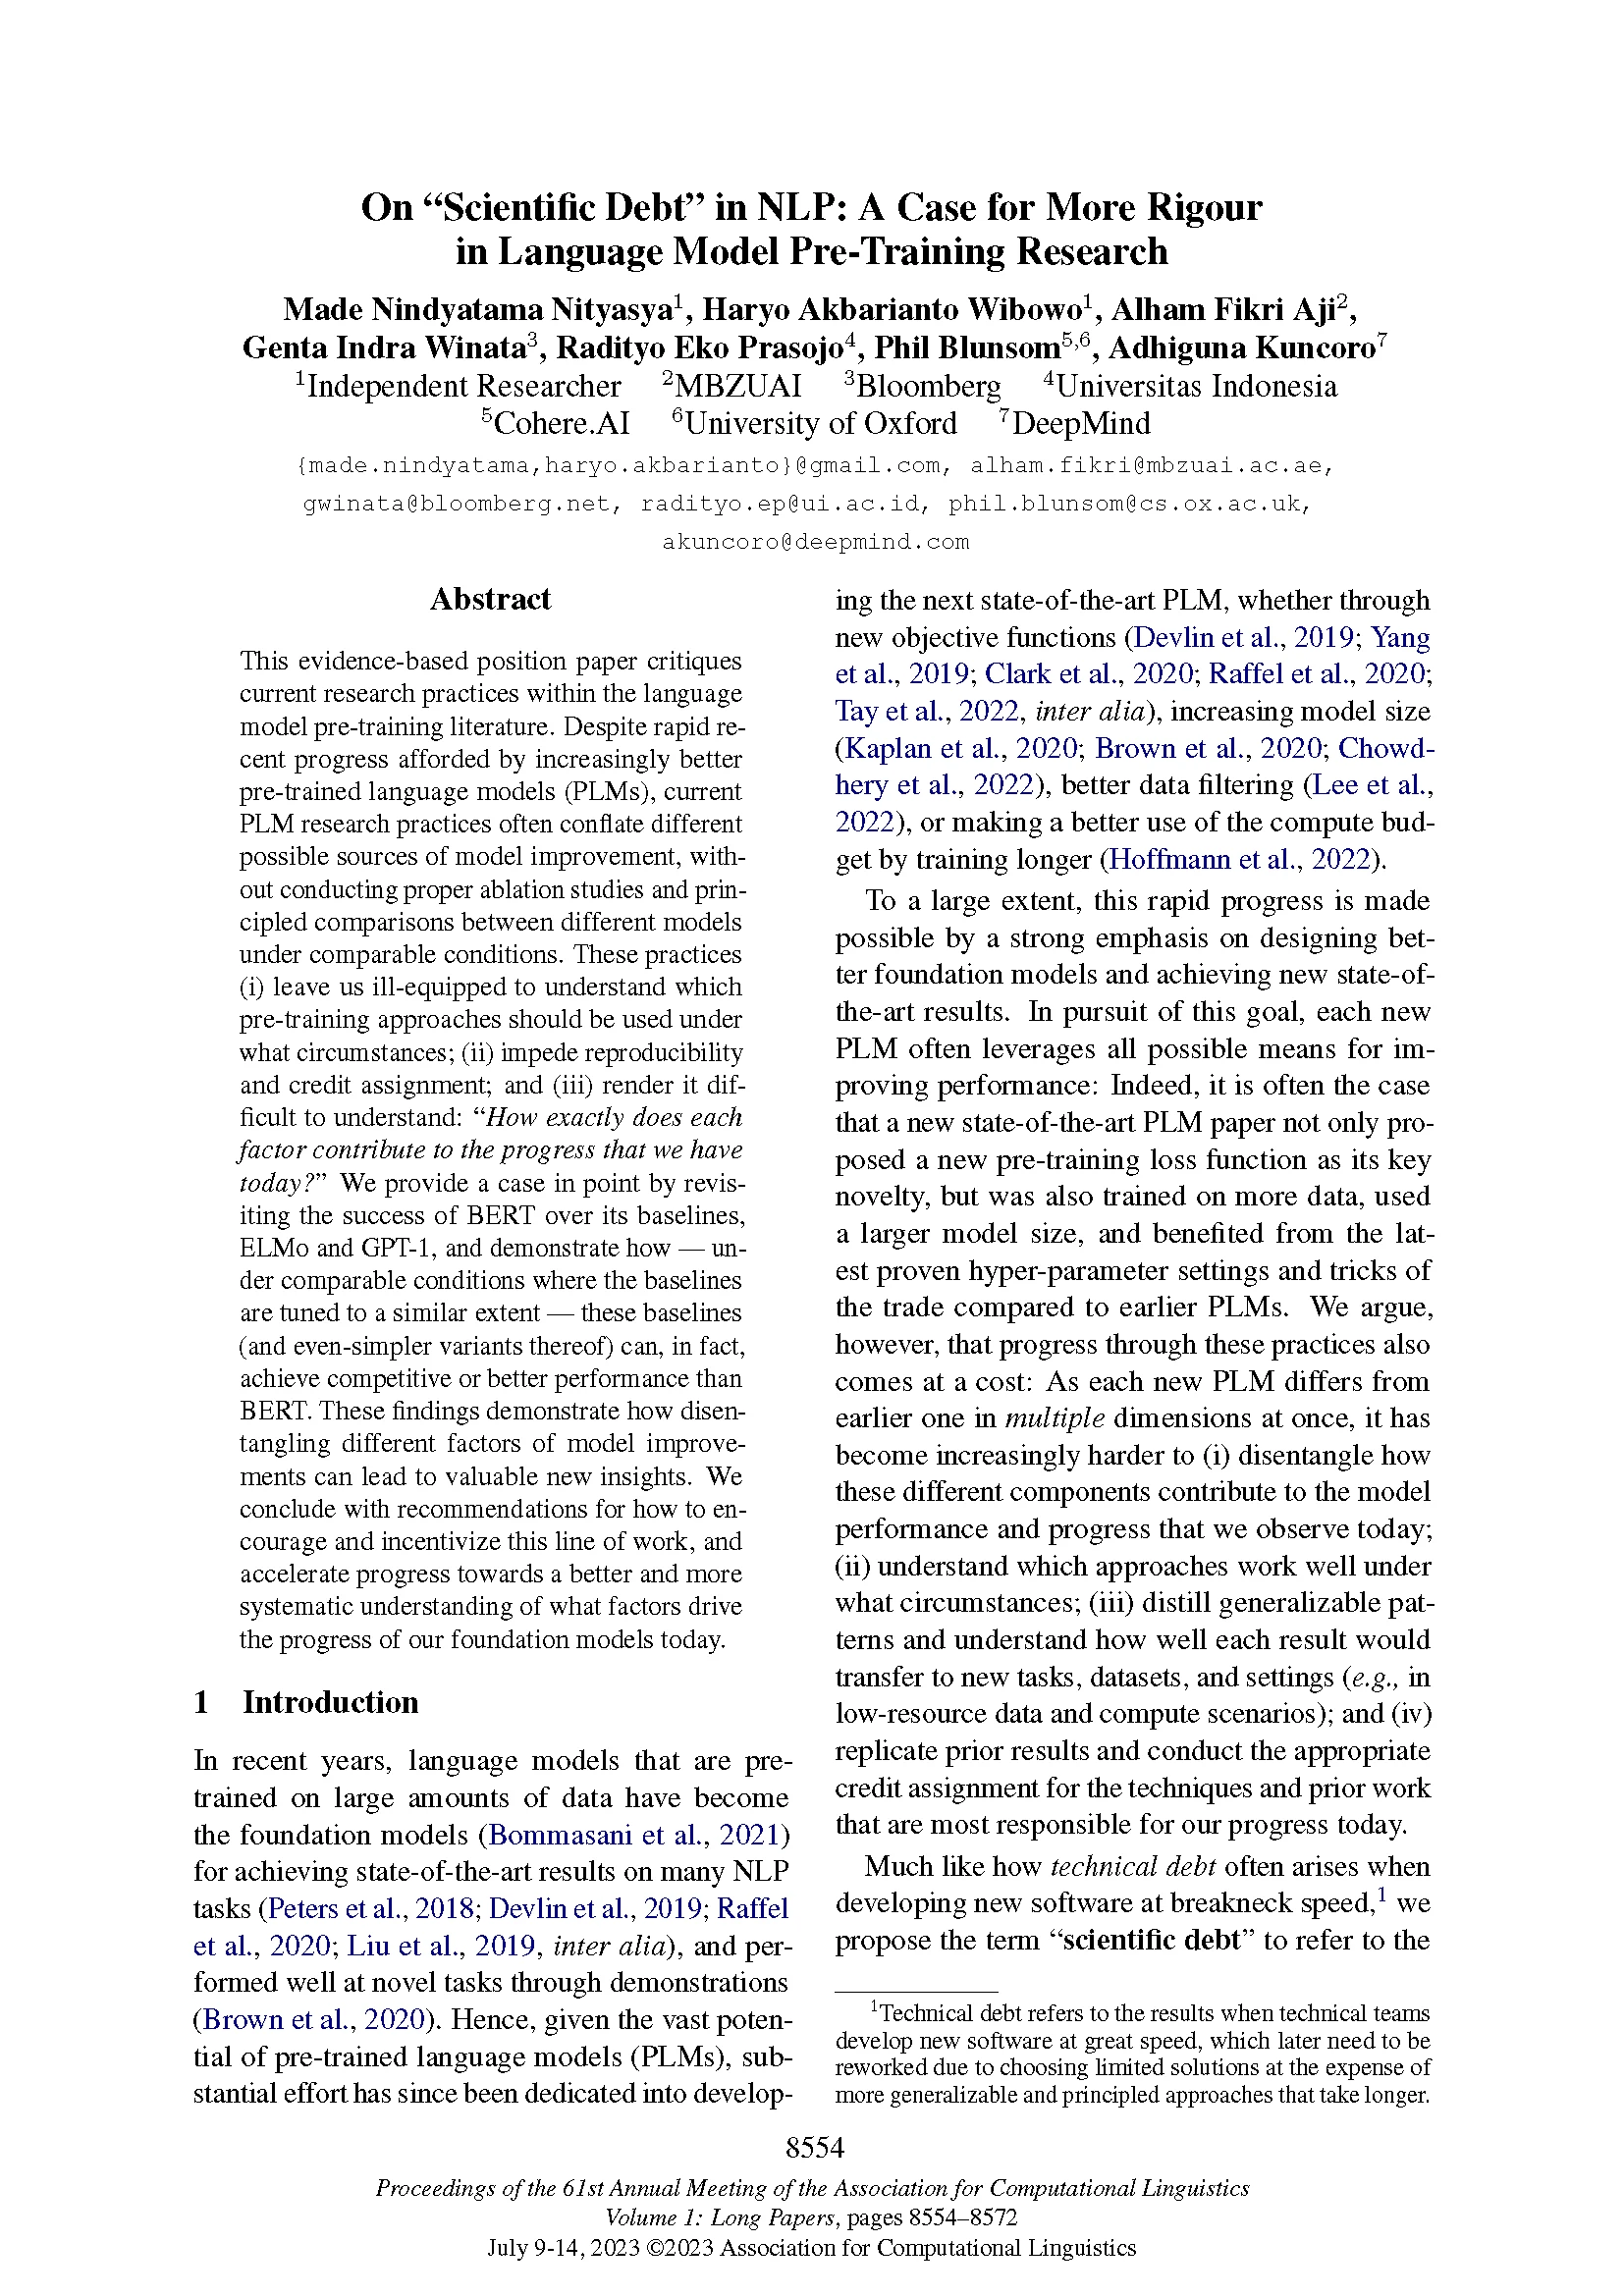 Front page of ACL 2023 paper "On "Scientific Debt" in NLP: A Case for More Rigour in Language Model Pre-Training Research"